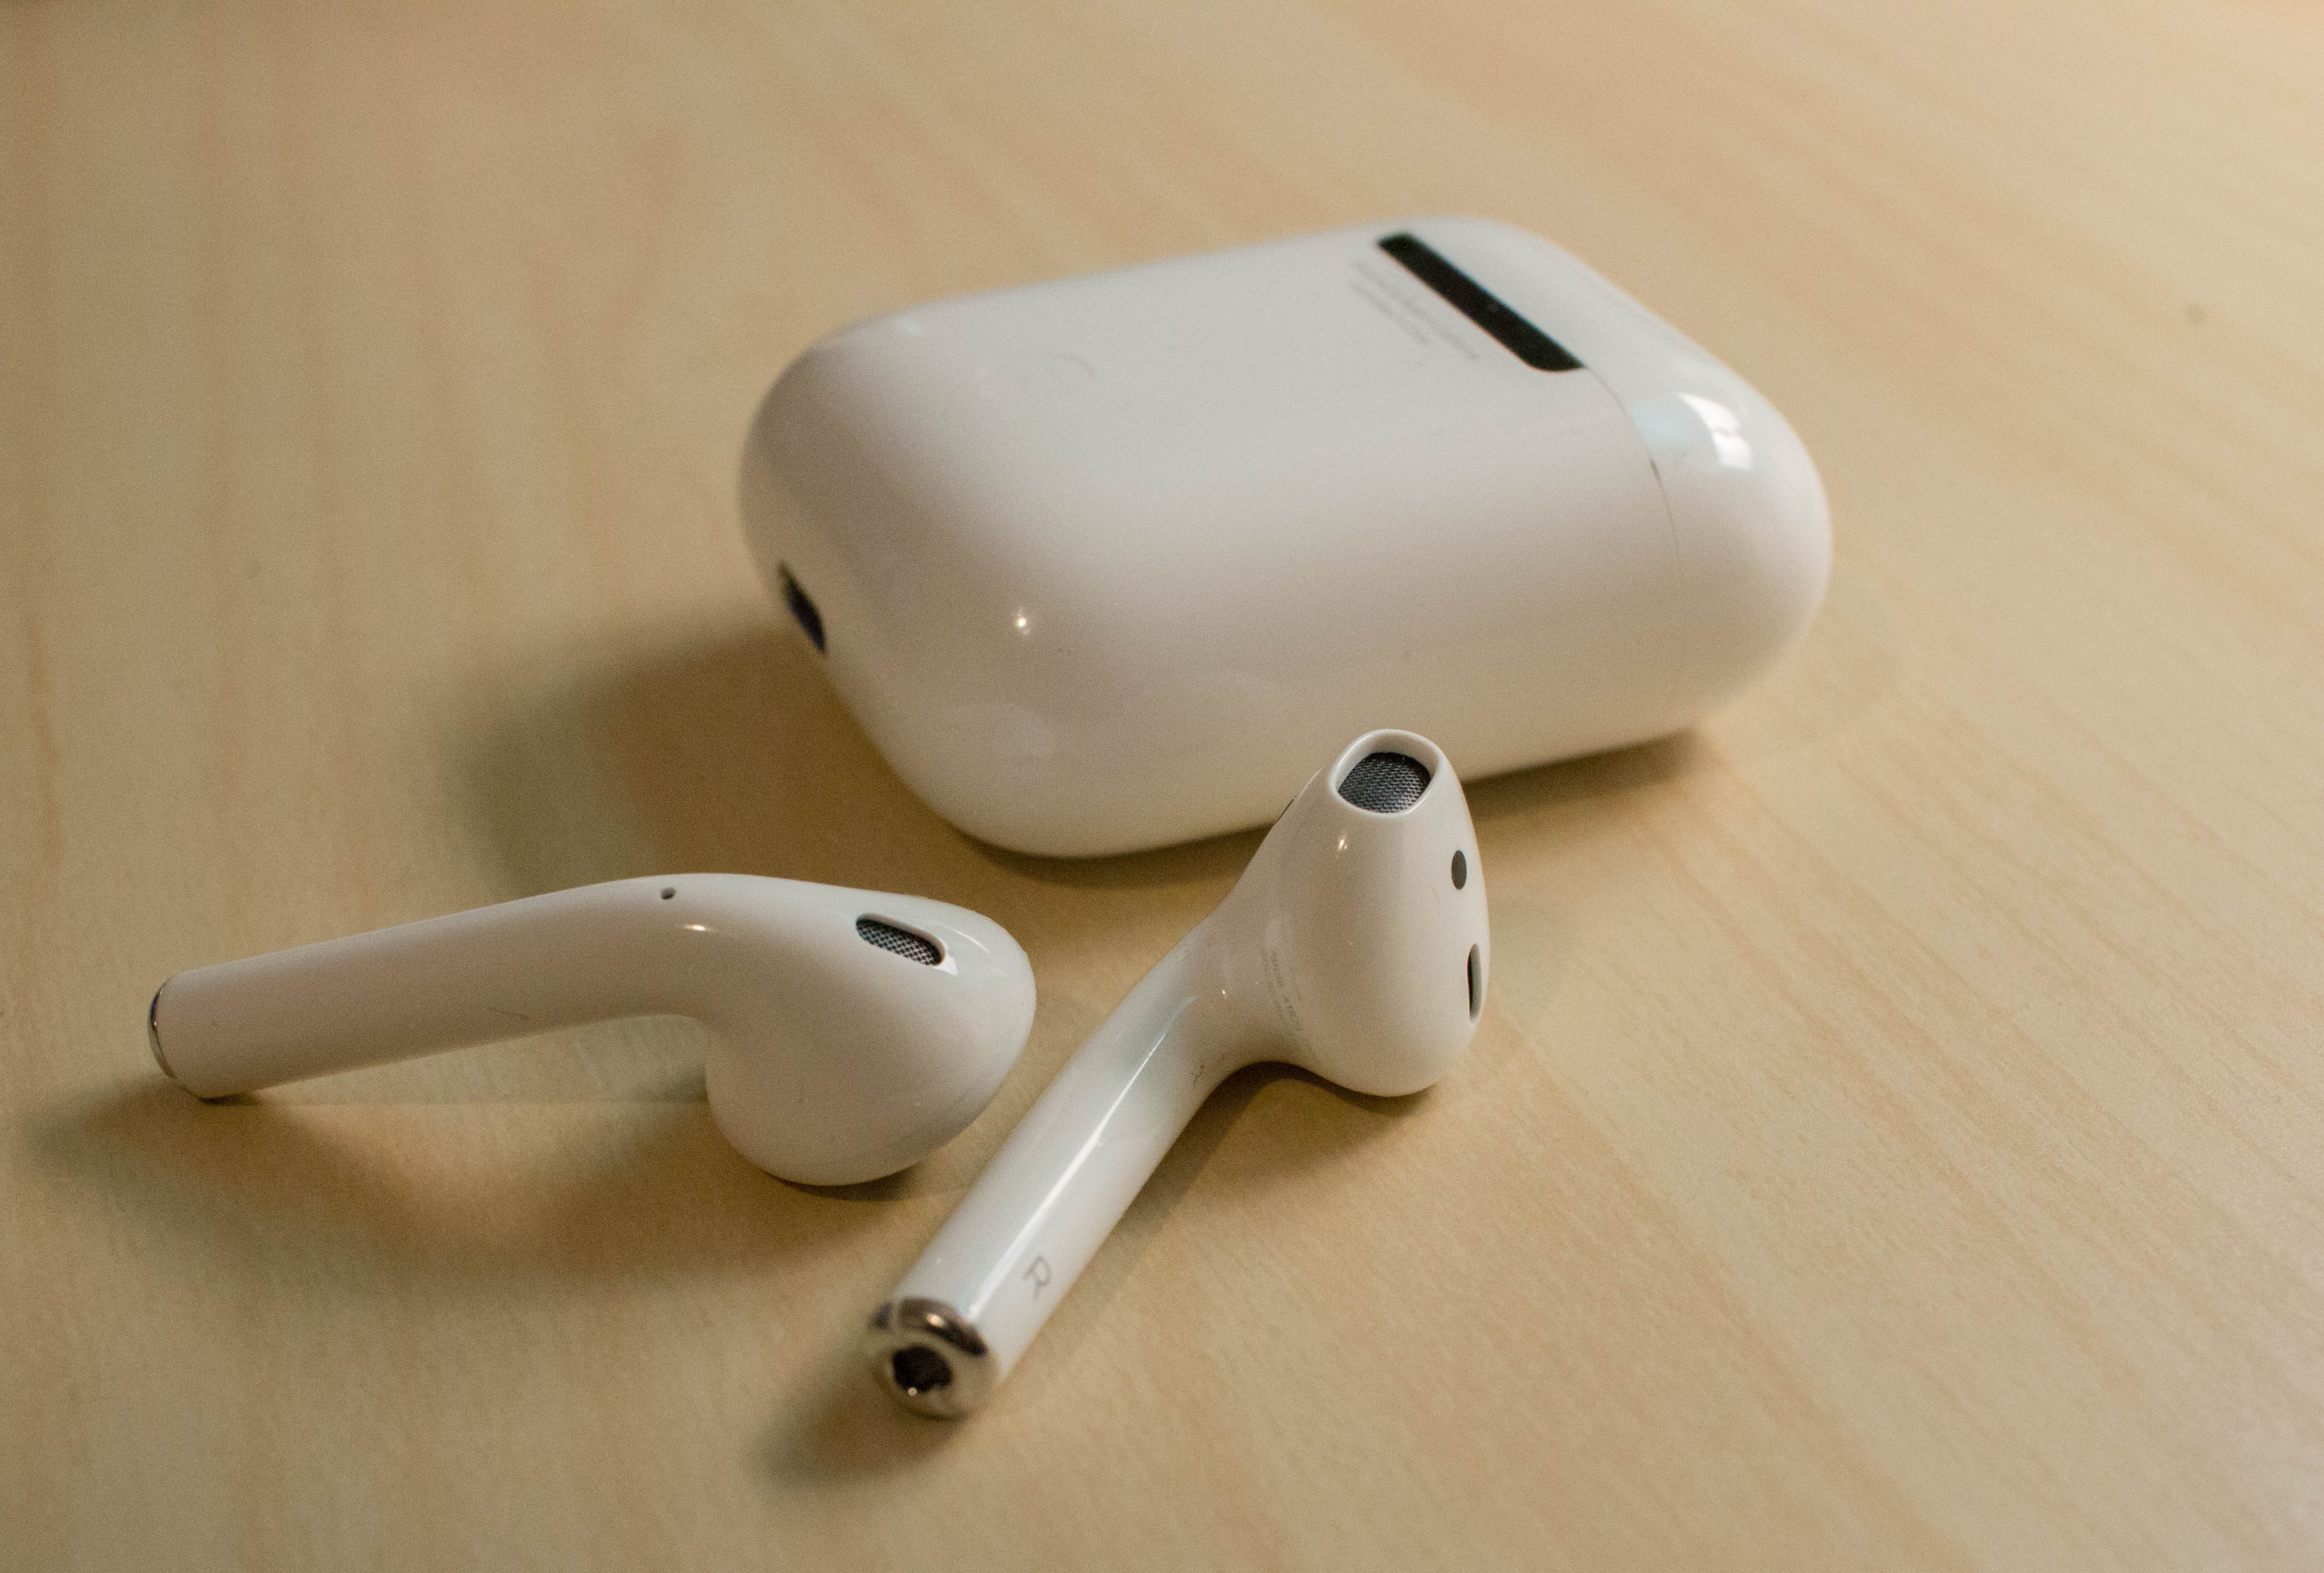 AirPods 2. Even better.